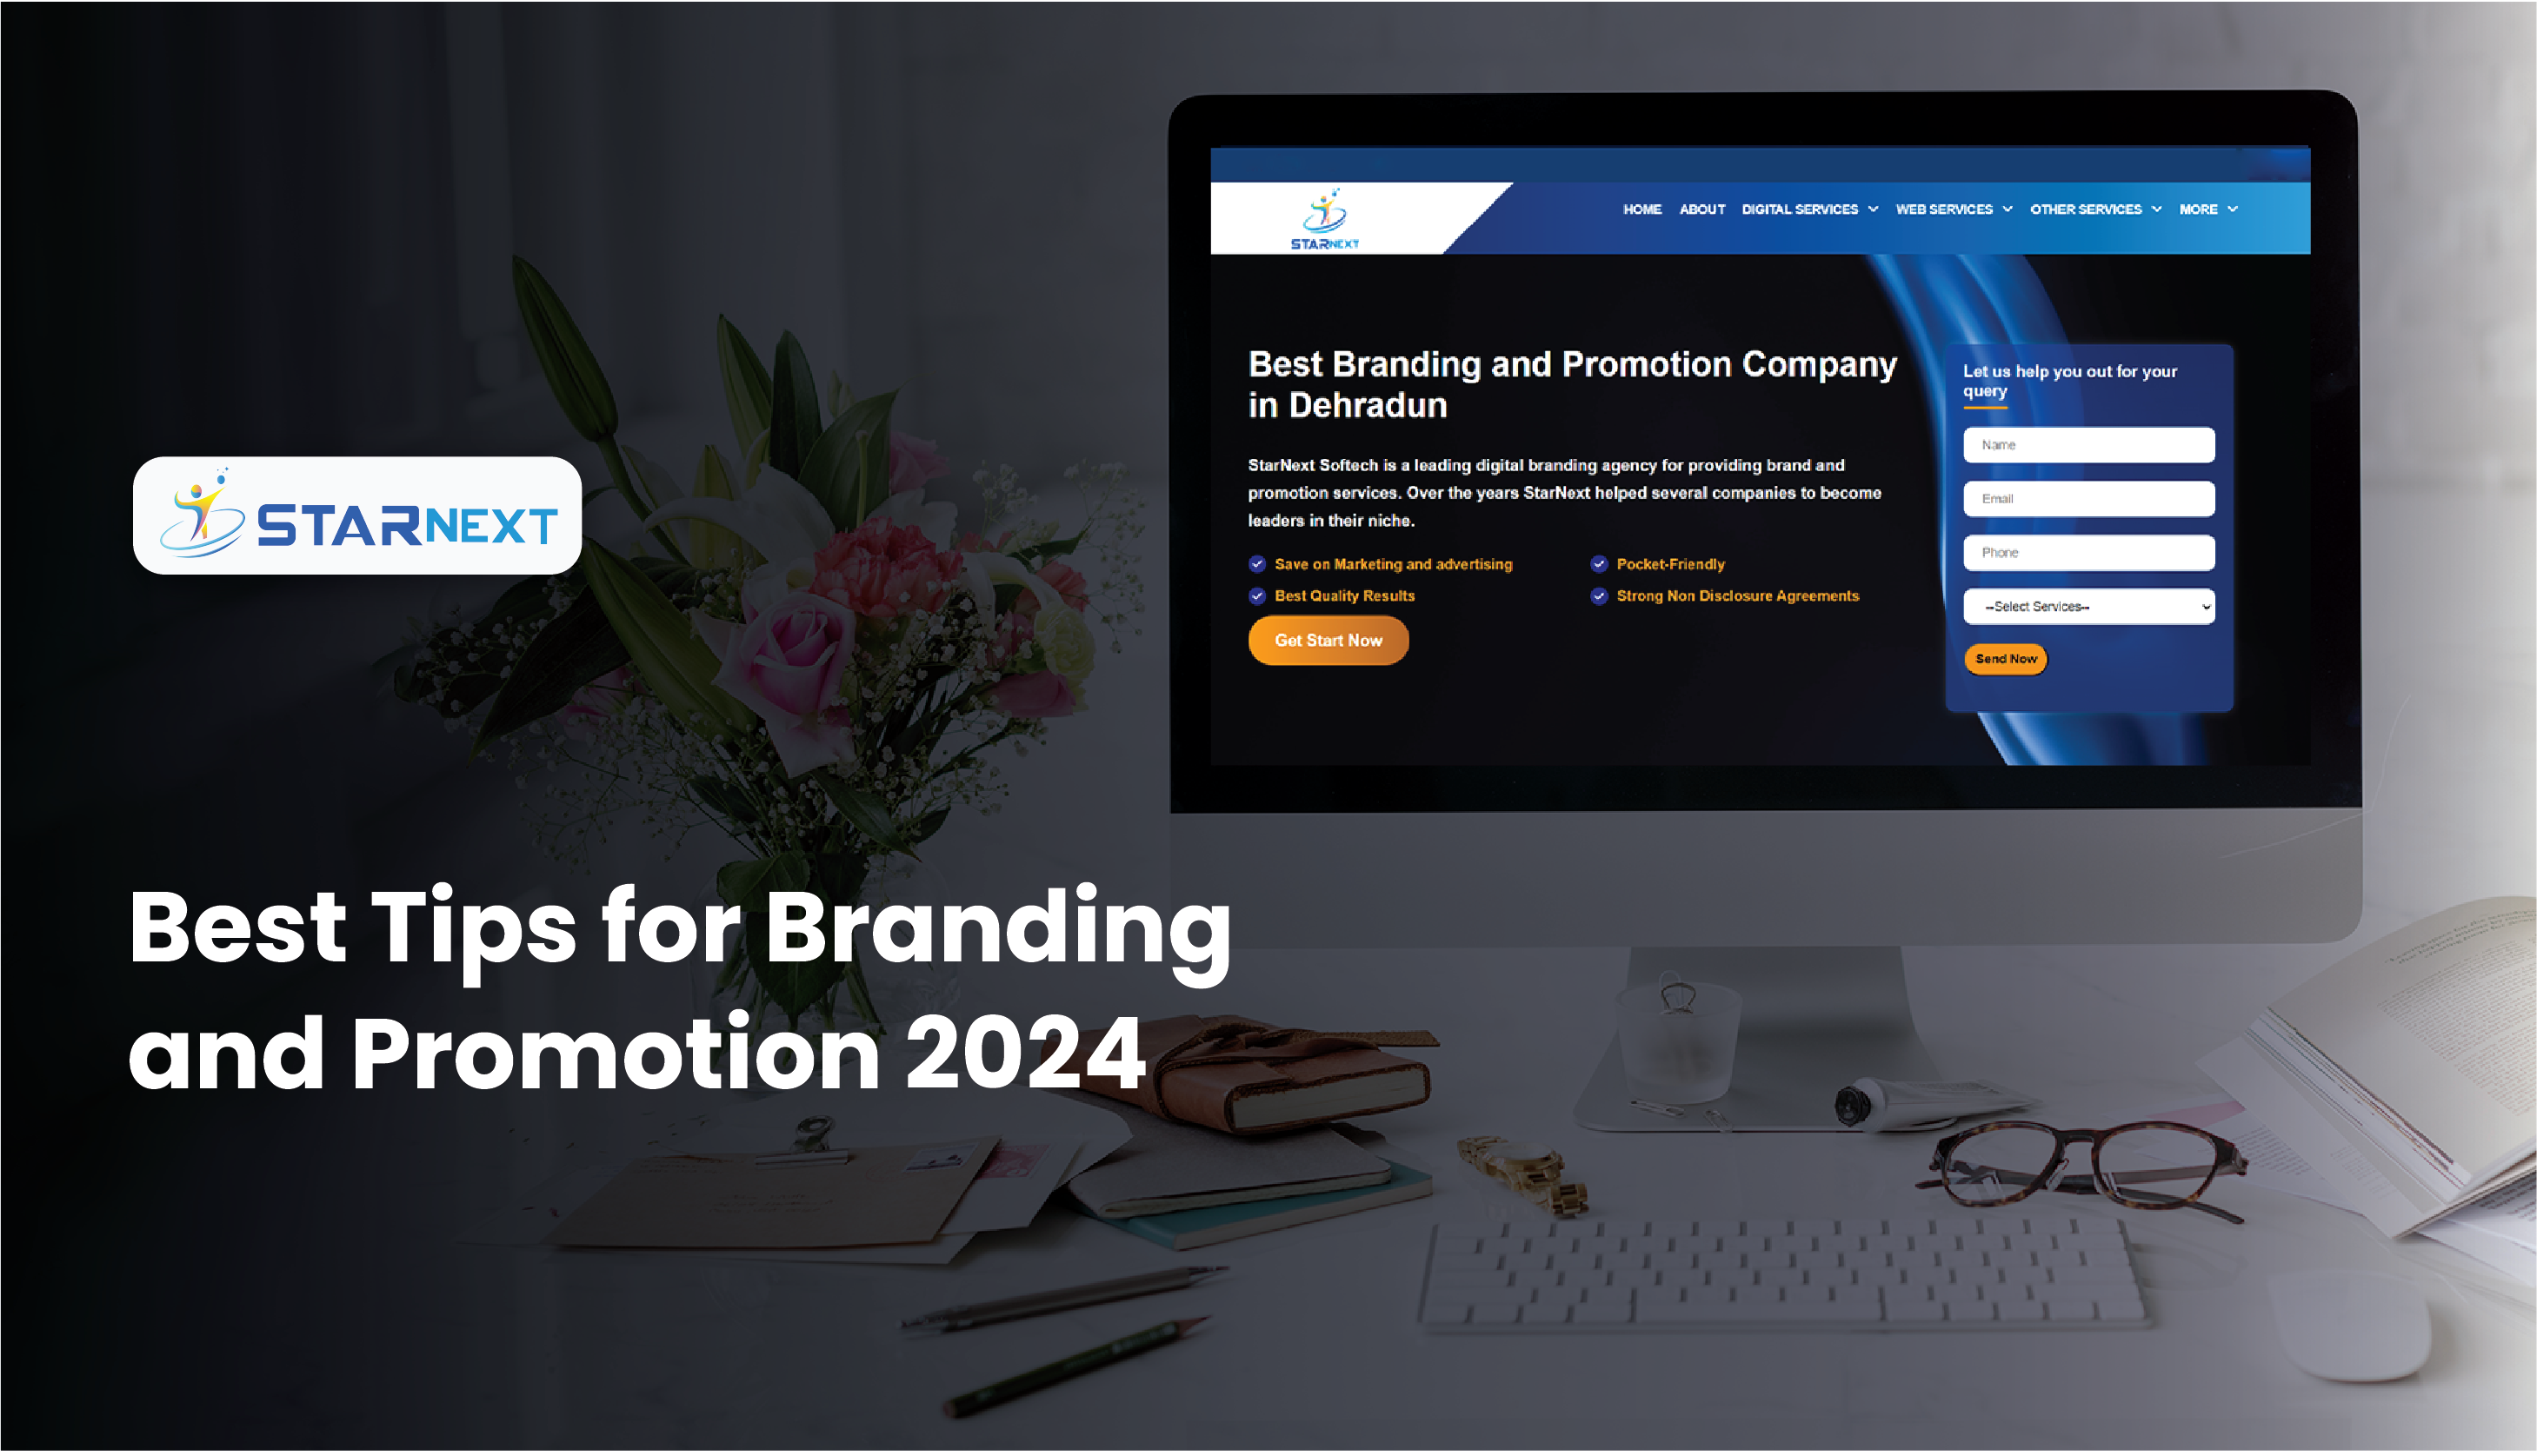 Best Tips for Branding and Promotion 2024